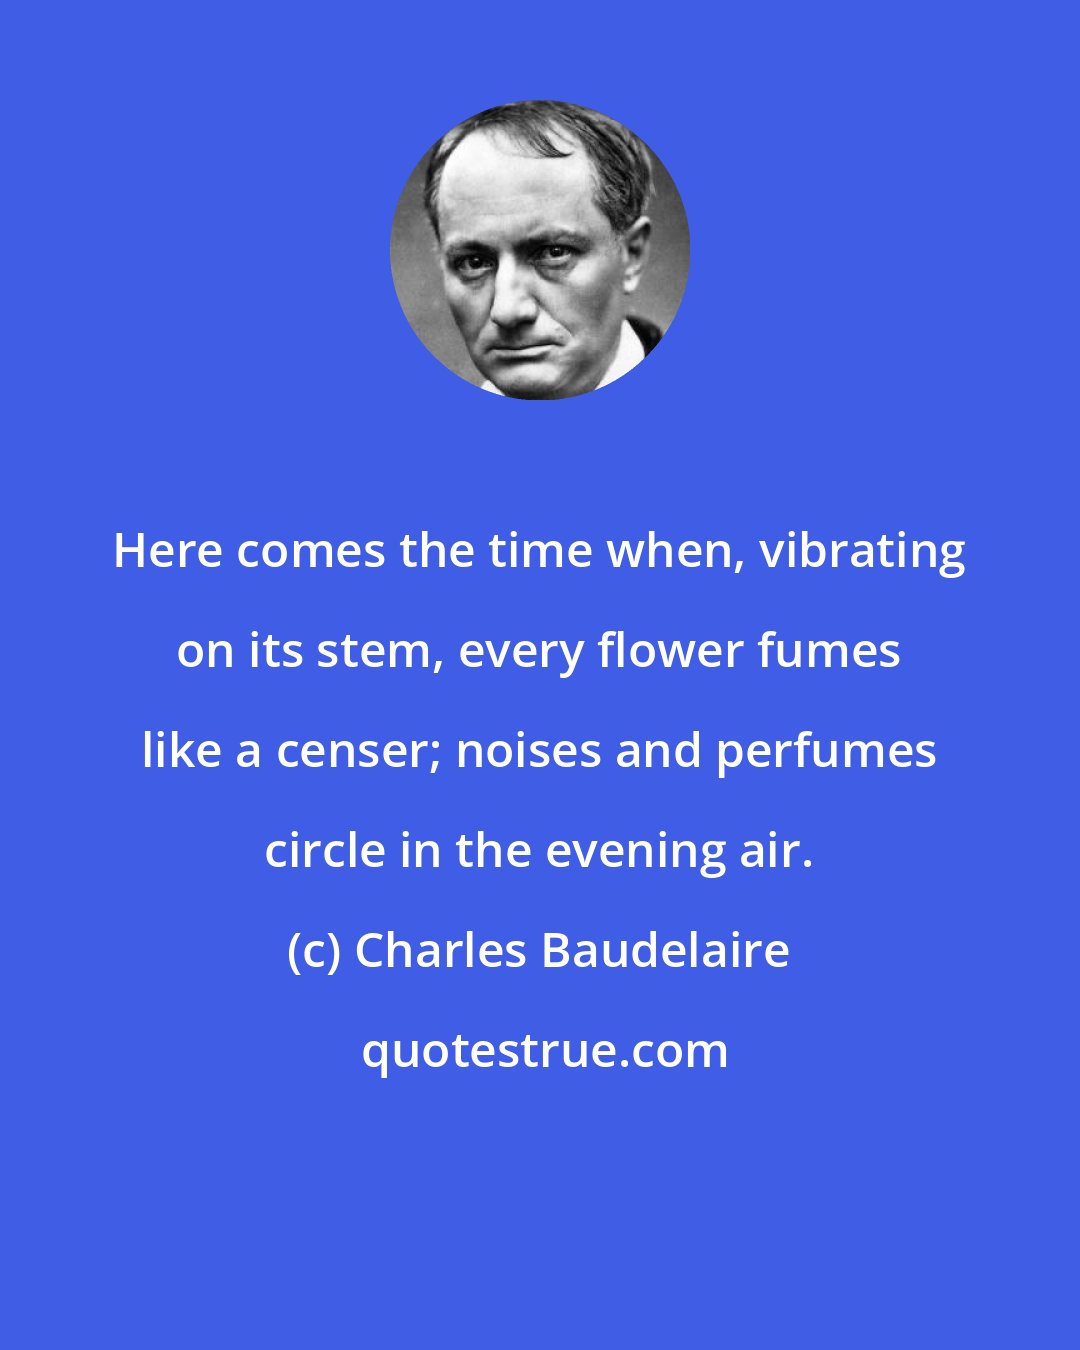 Charles Baudelaire: Here comes the time when, vibrating on its stem, every flower fumes like a censer; noises and perfumes circle in the evening air.